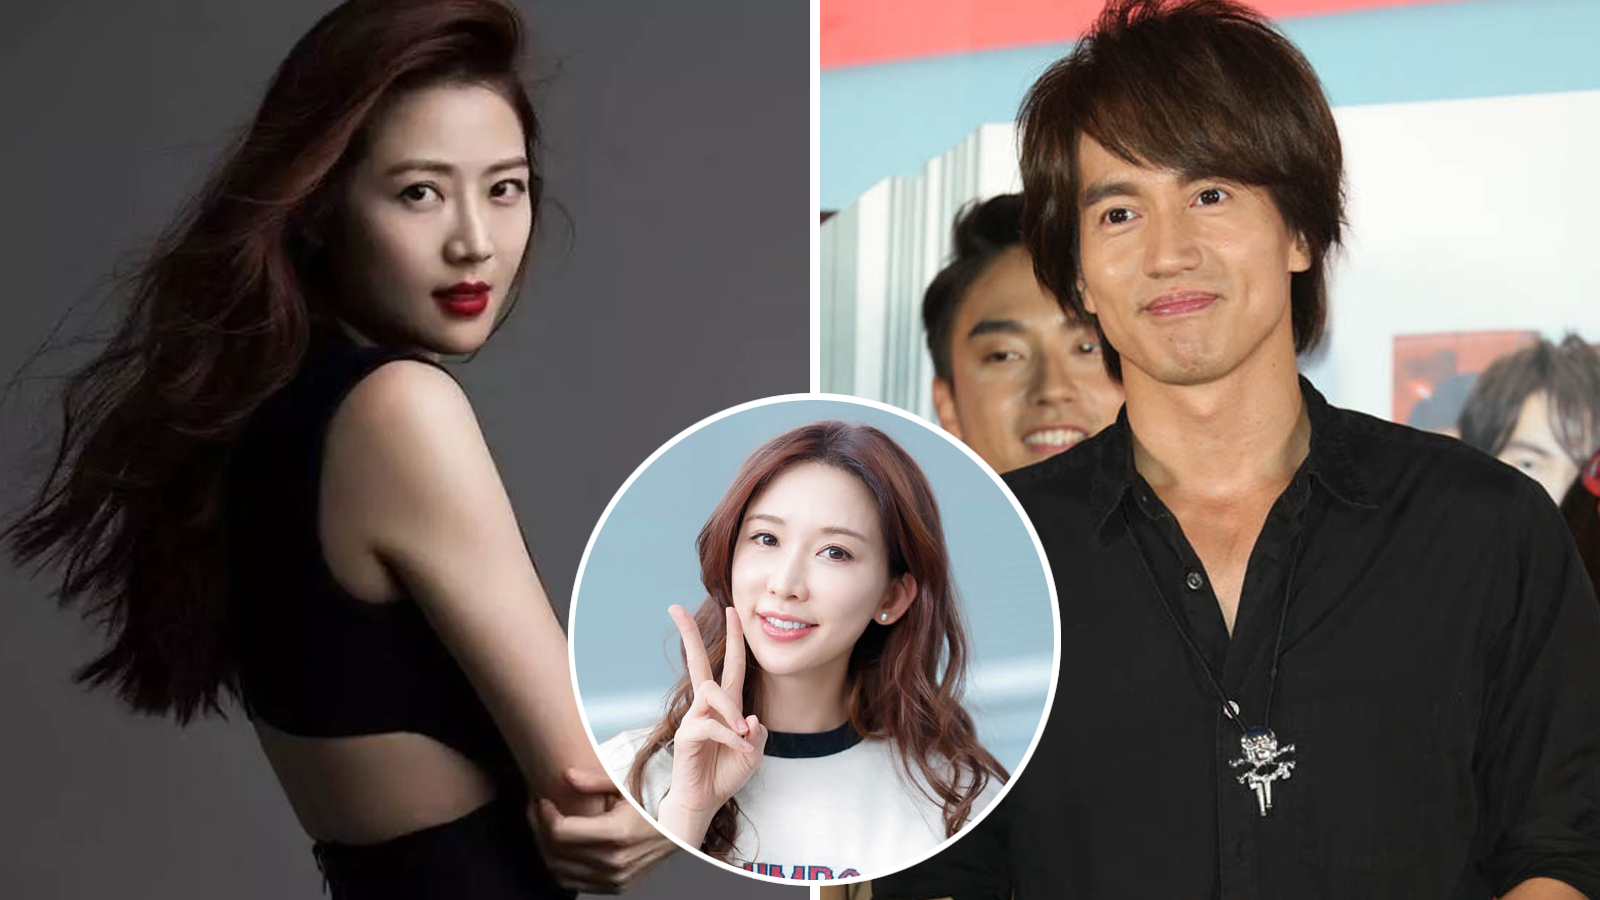 Jerry Yan’s exgirlfriend claims Lin Chiling is still the love of his